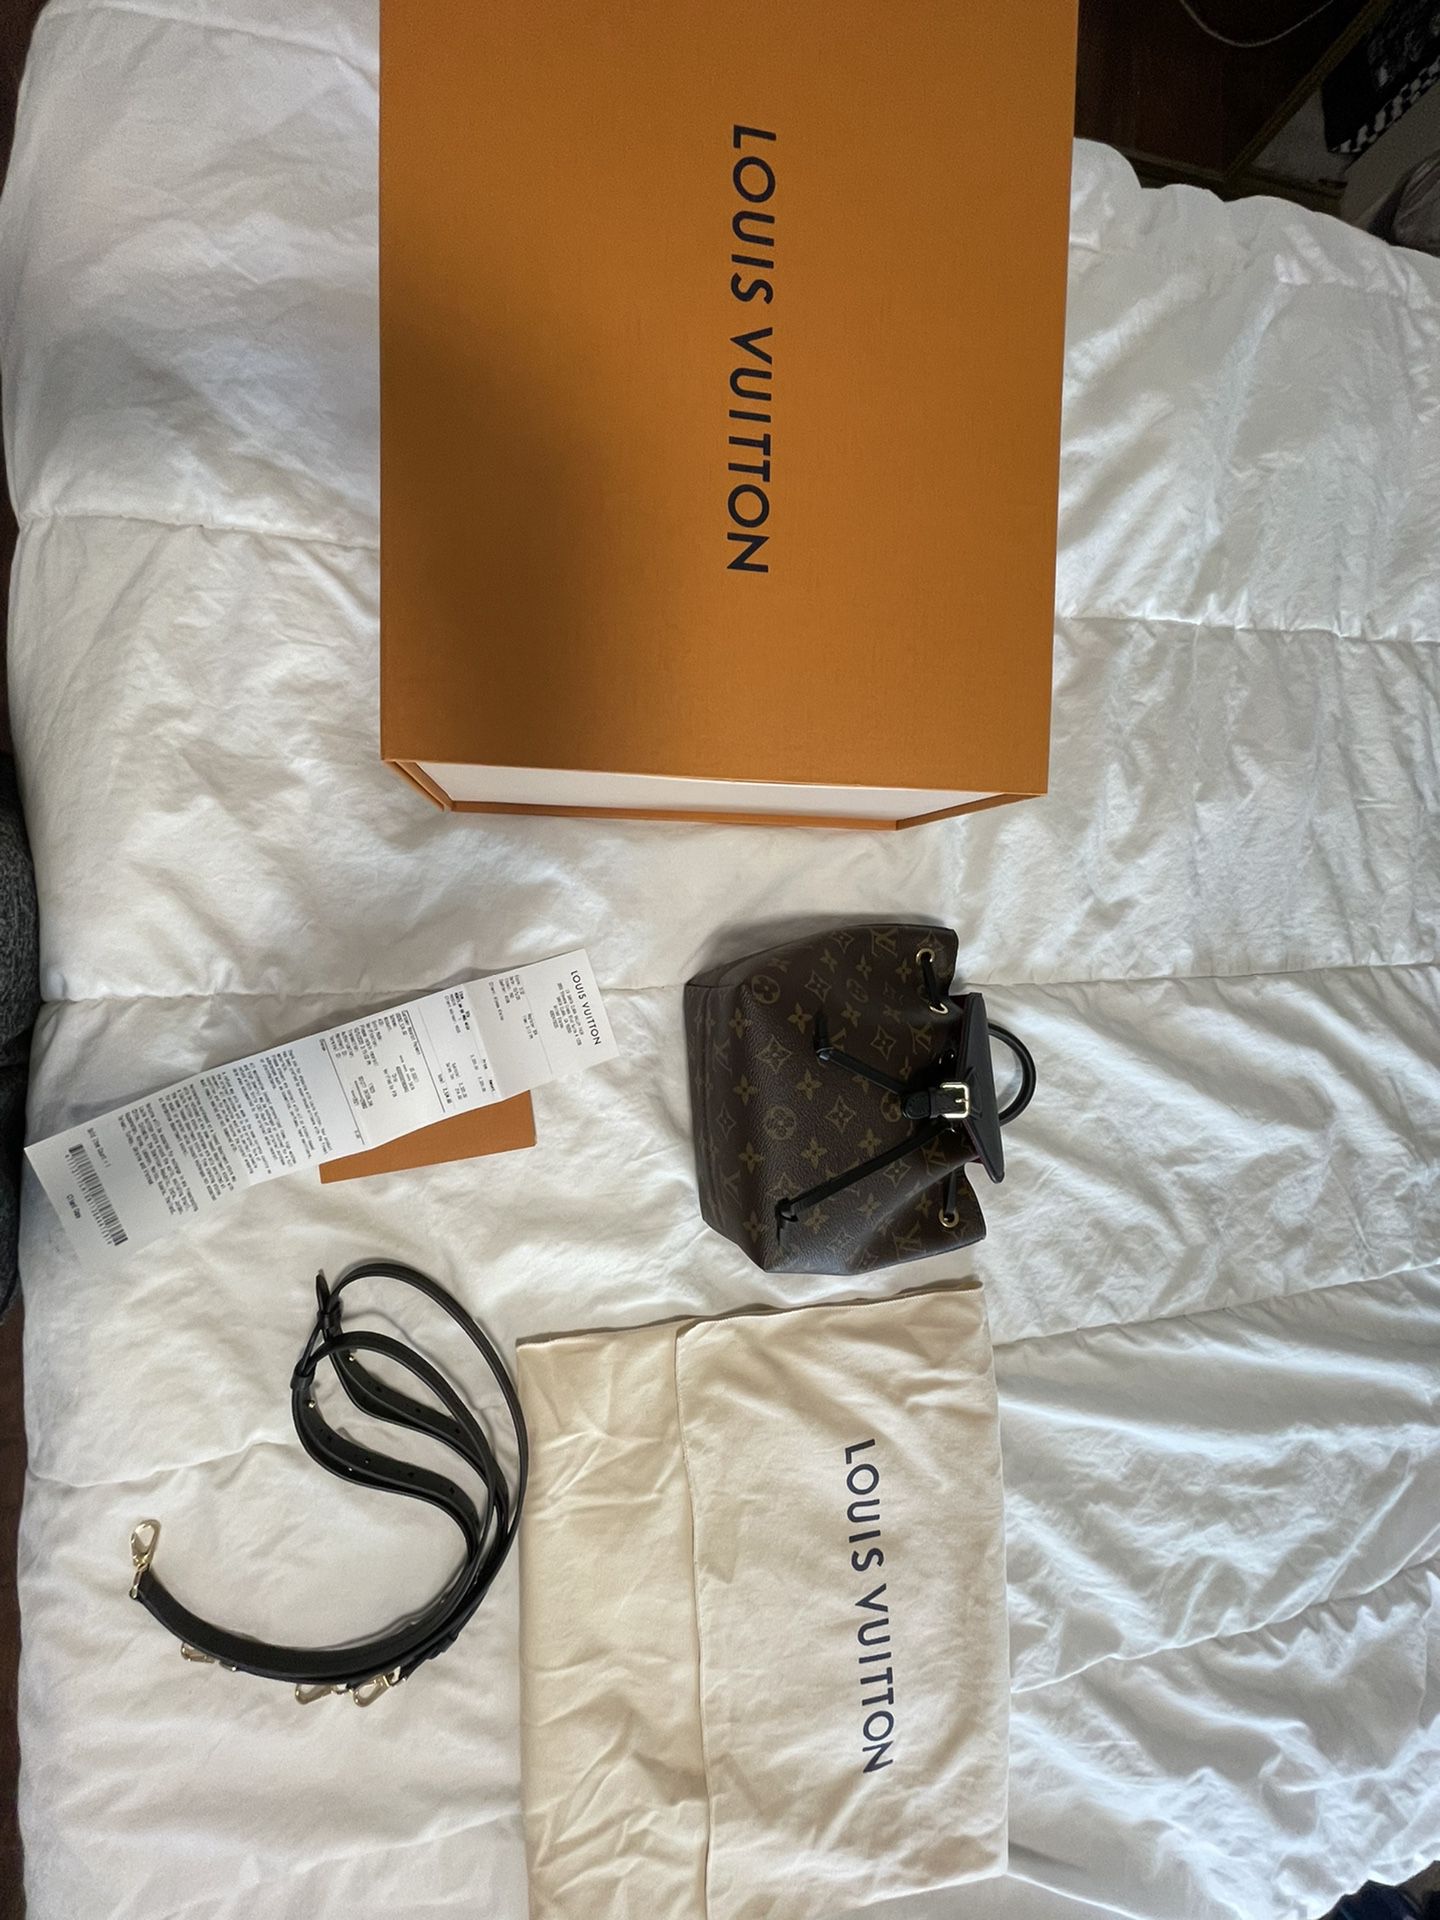 PRELOVED LOUIS VUITTON MONTSOURIS BACKPACK MM – OC Luxury Bags